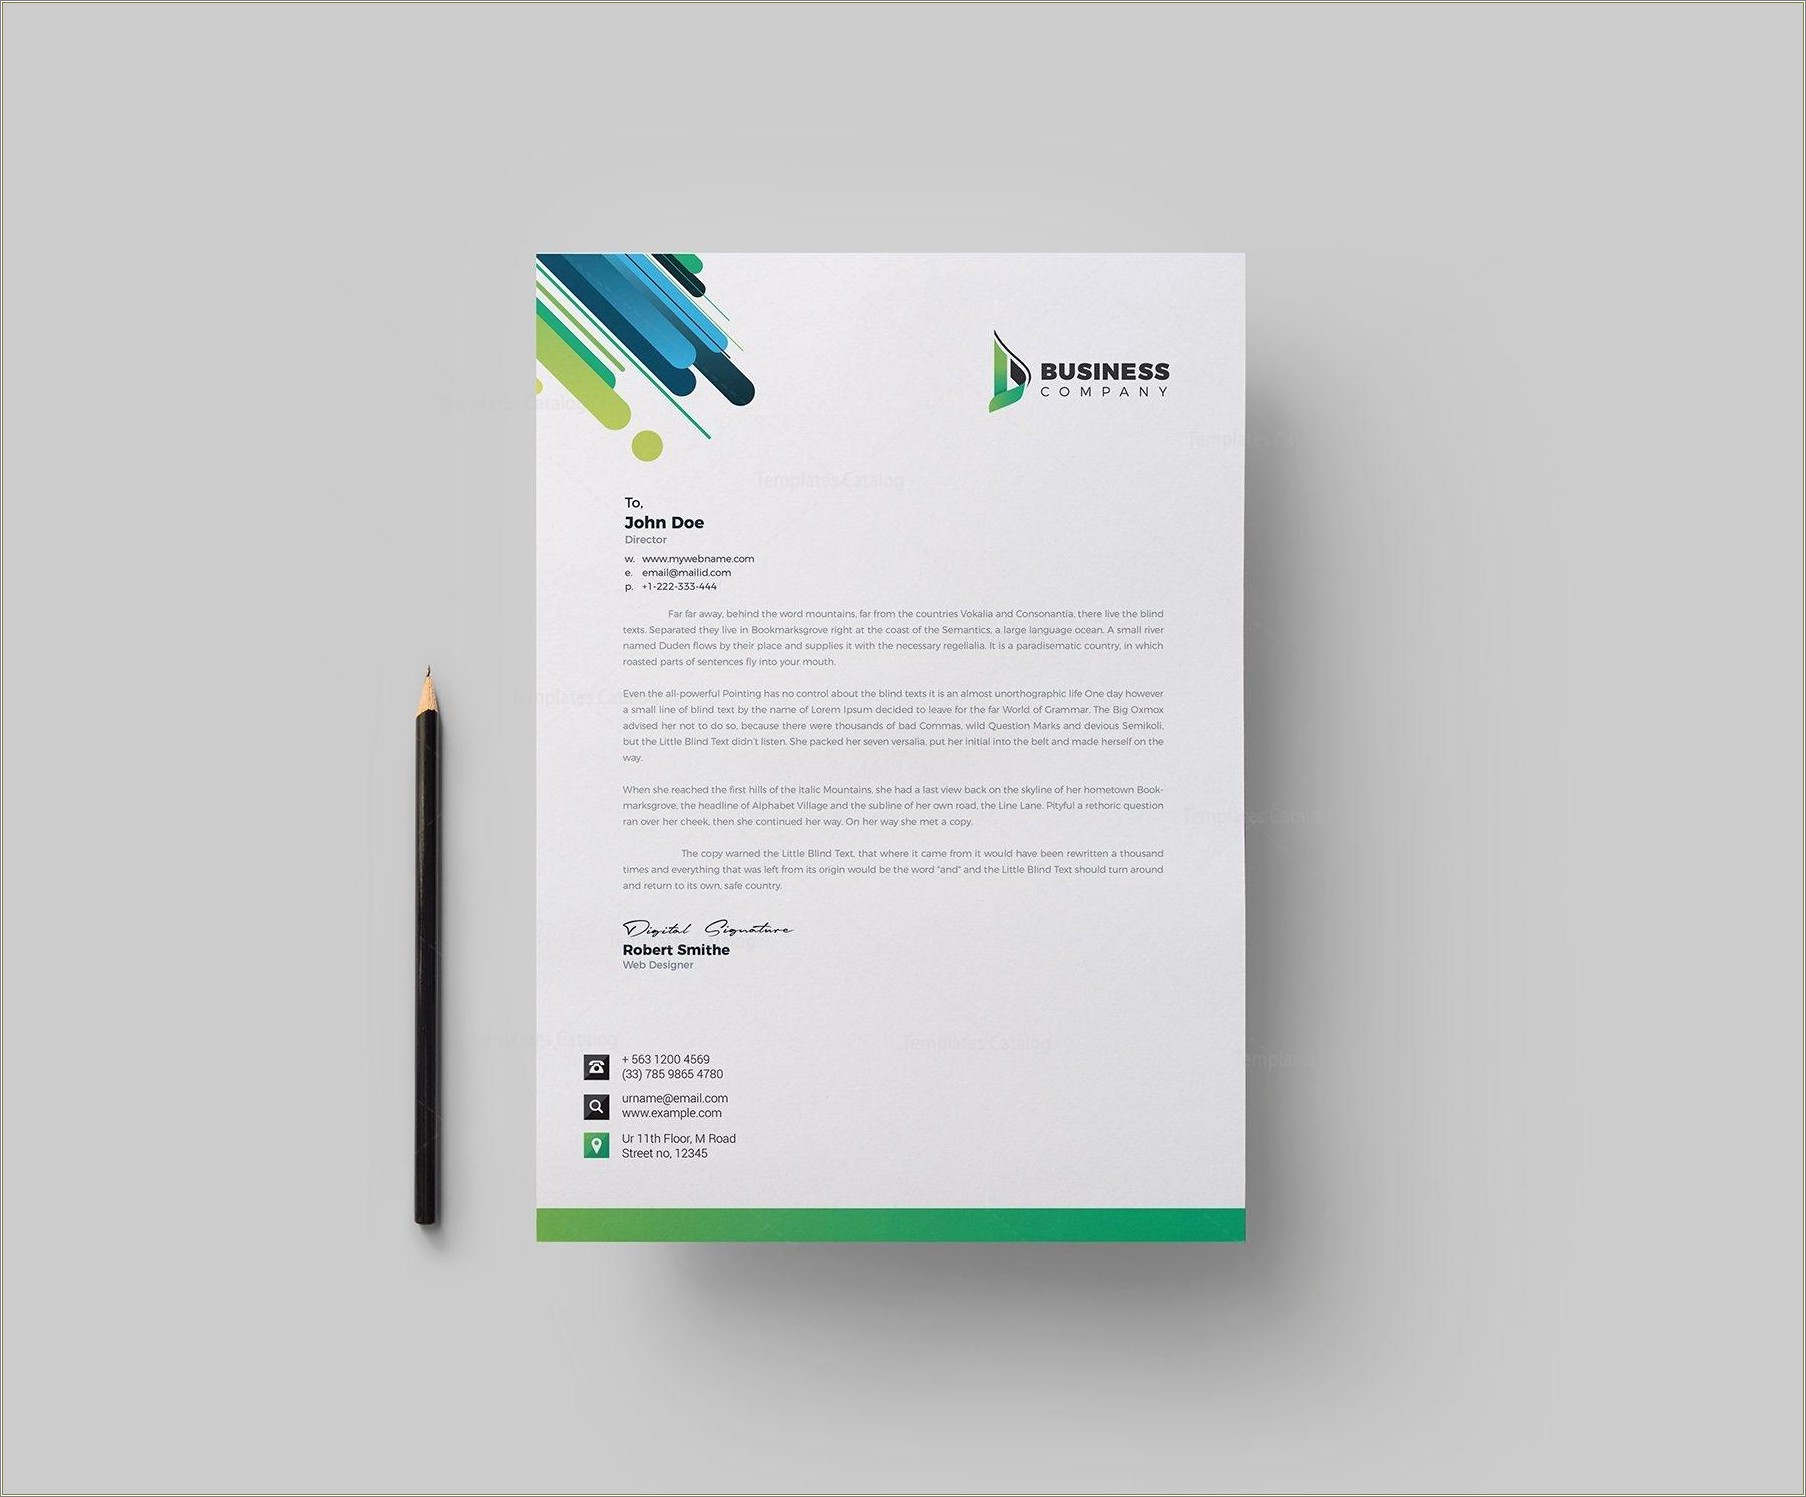 Free Business Letterhead Design Template With Green Colot